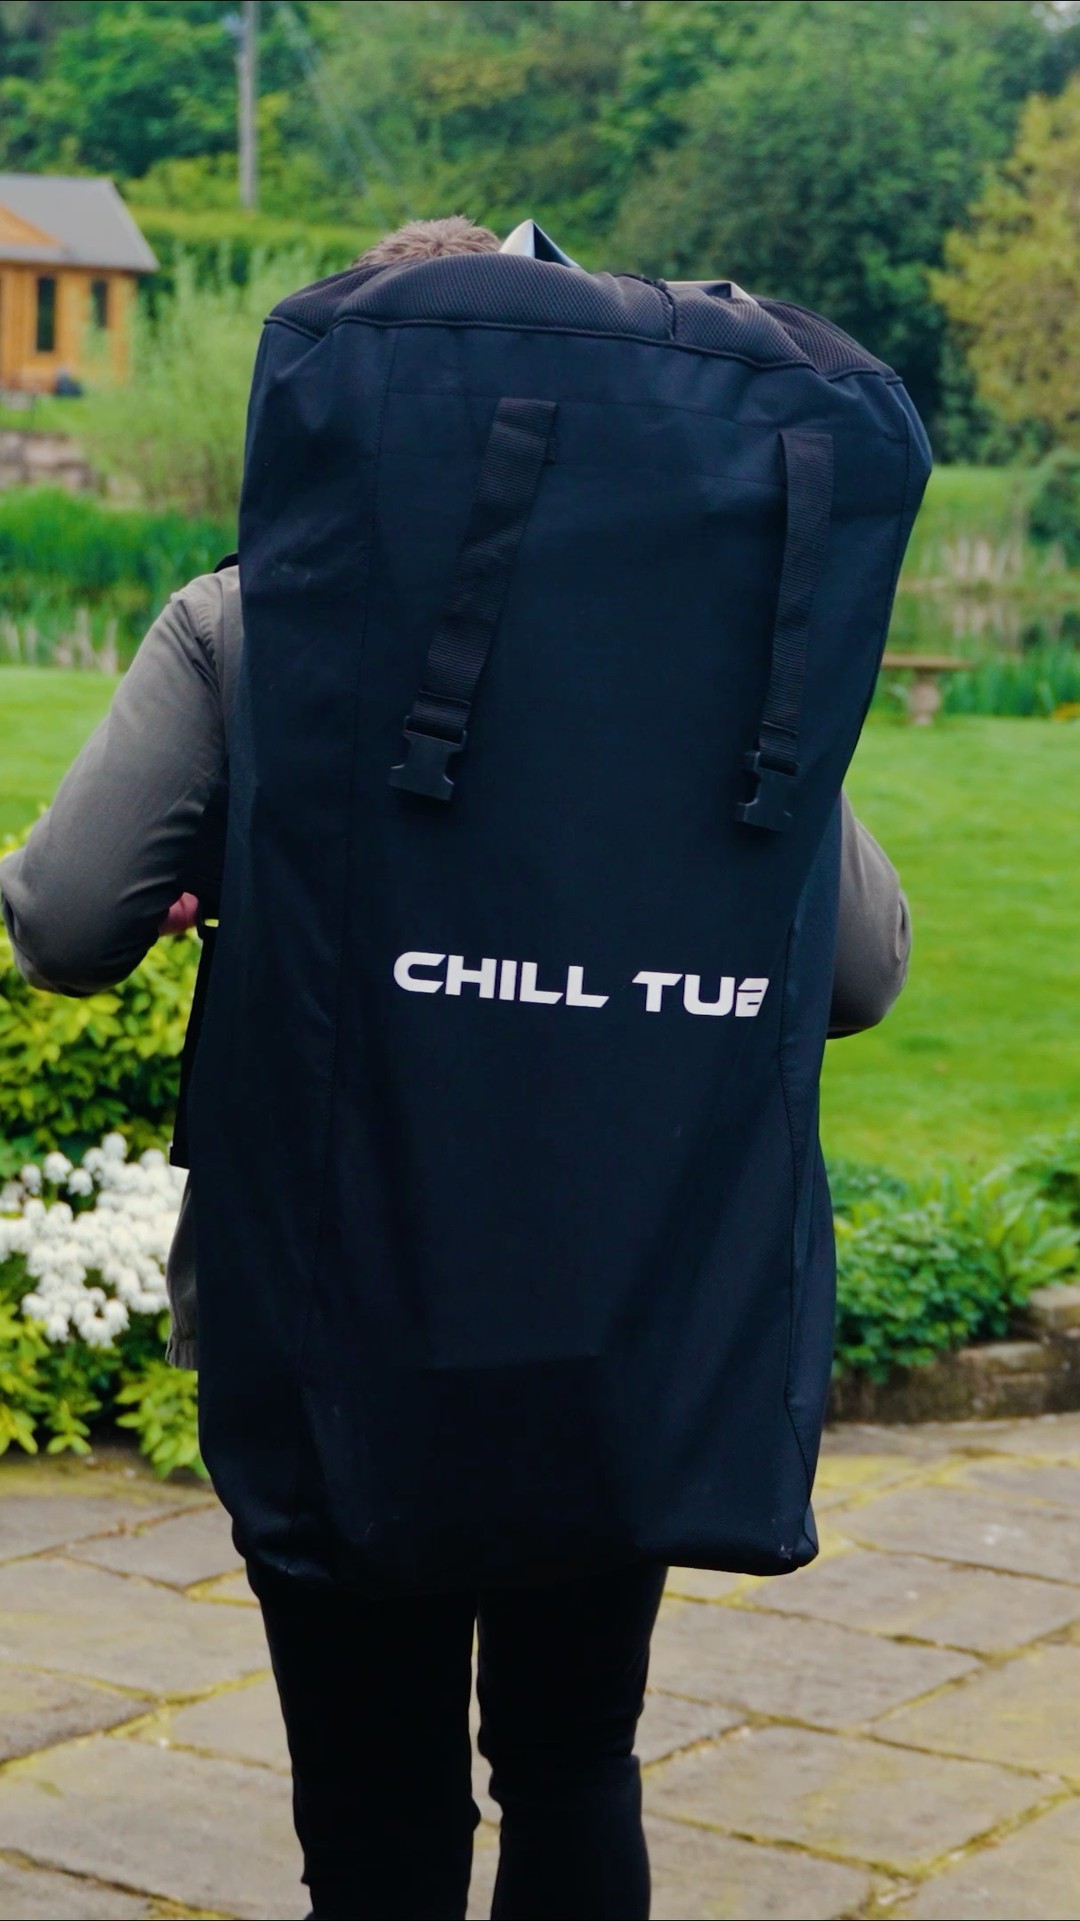 Summer is nearly here and we ve got everything that you ll need to stay cool on those warm days       The Chill Tubs Essential Pod is transportable  so you can take it with you anywhere to continue those daily dips    Going away for the weekend? Staying with relatives for the week? We ve got you covered        Pre-order yours now for just   499       #chilltubs #icebath #icebaths #coldplunge #coldwater #coldwatertherapy #coldwaterimmersion #recovery #wellness #wellbeing